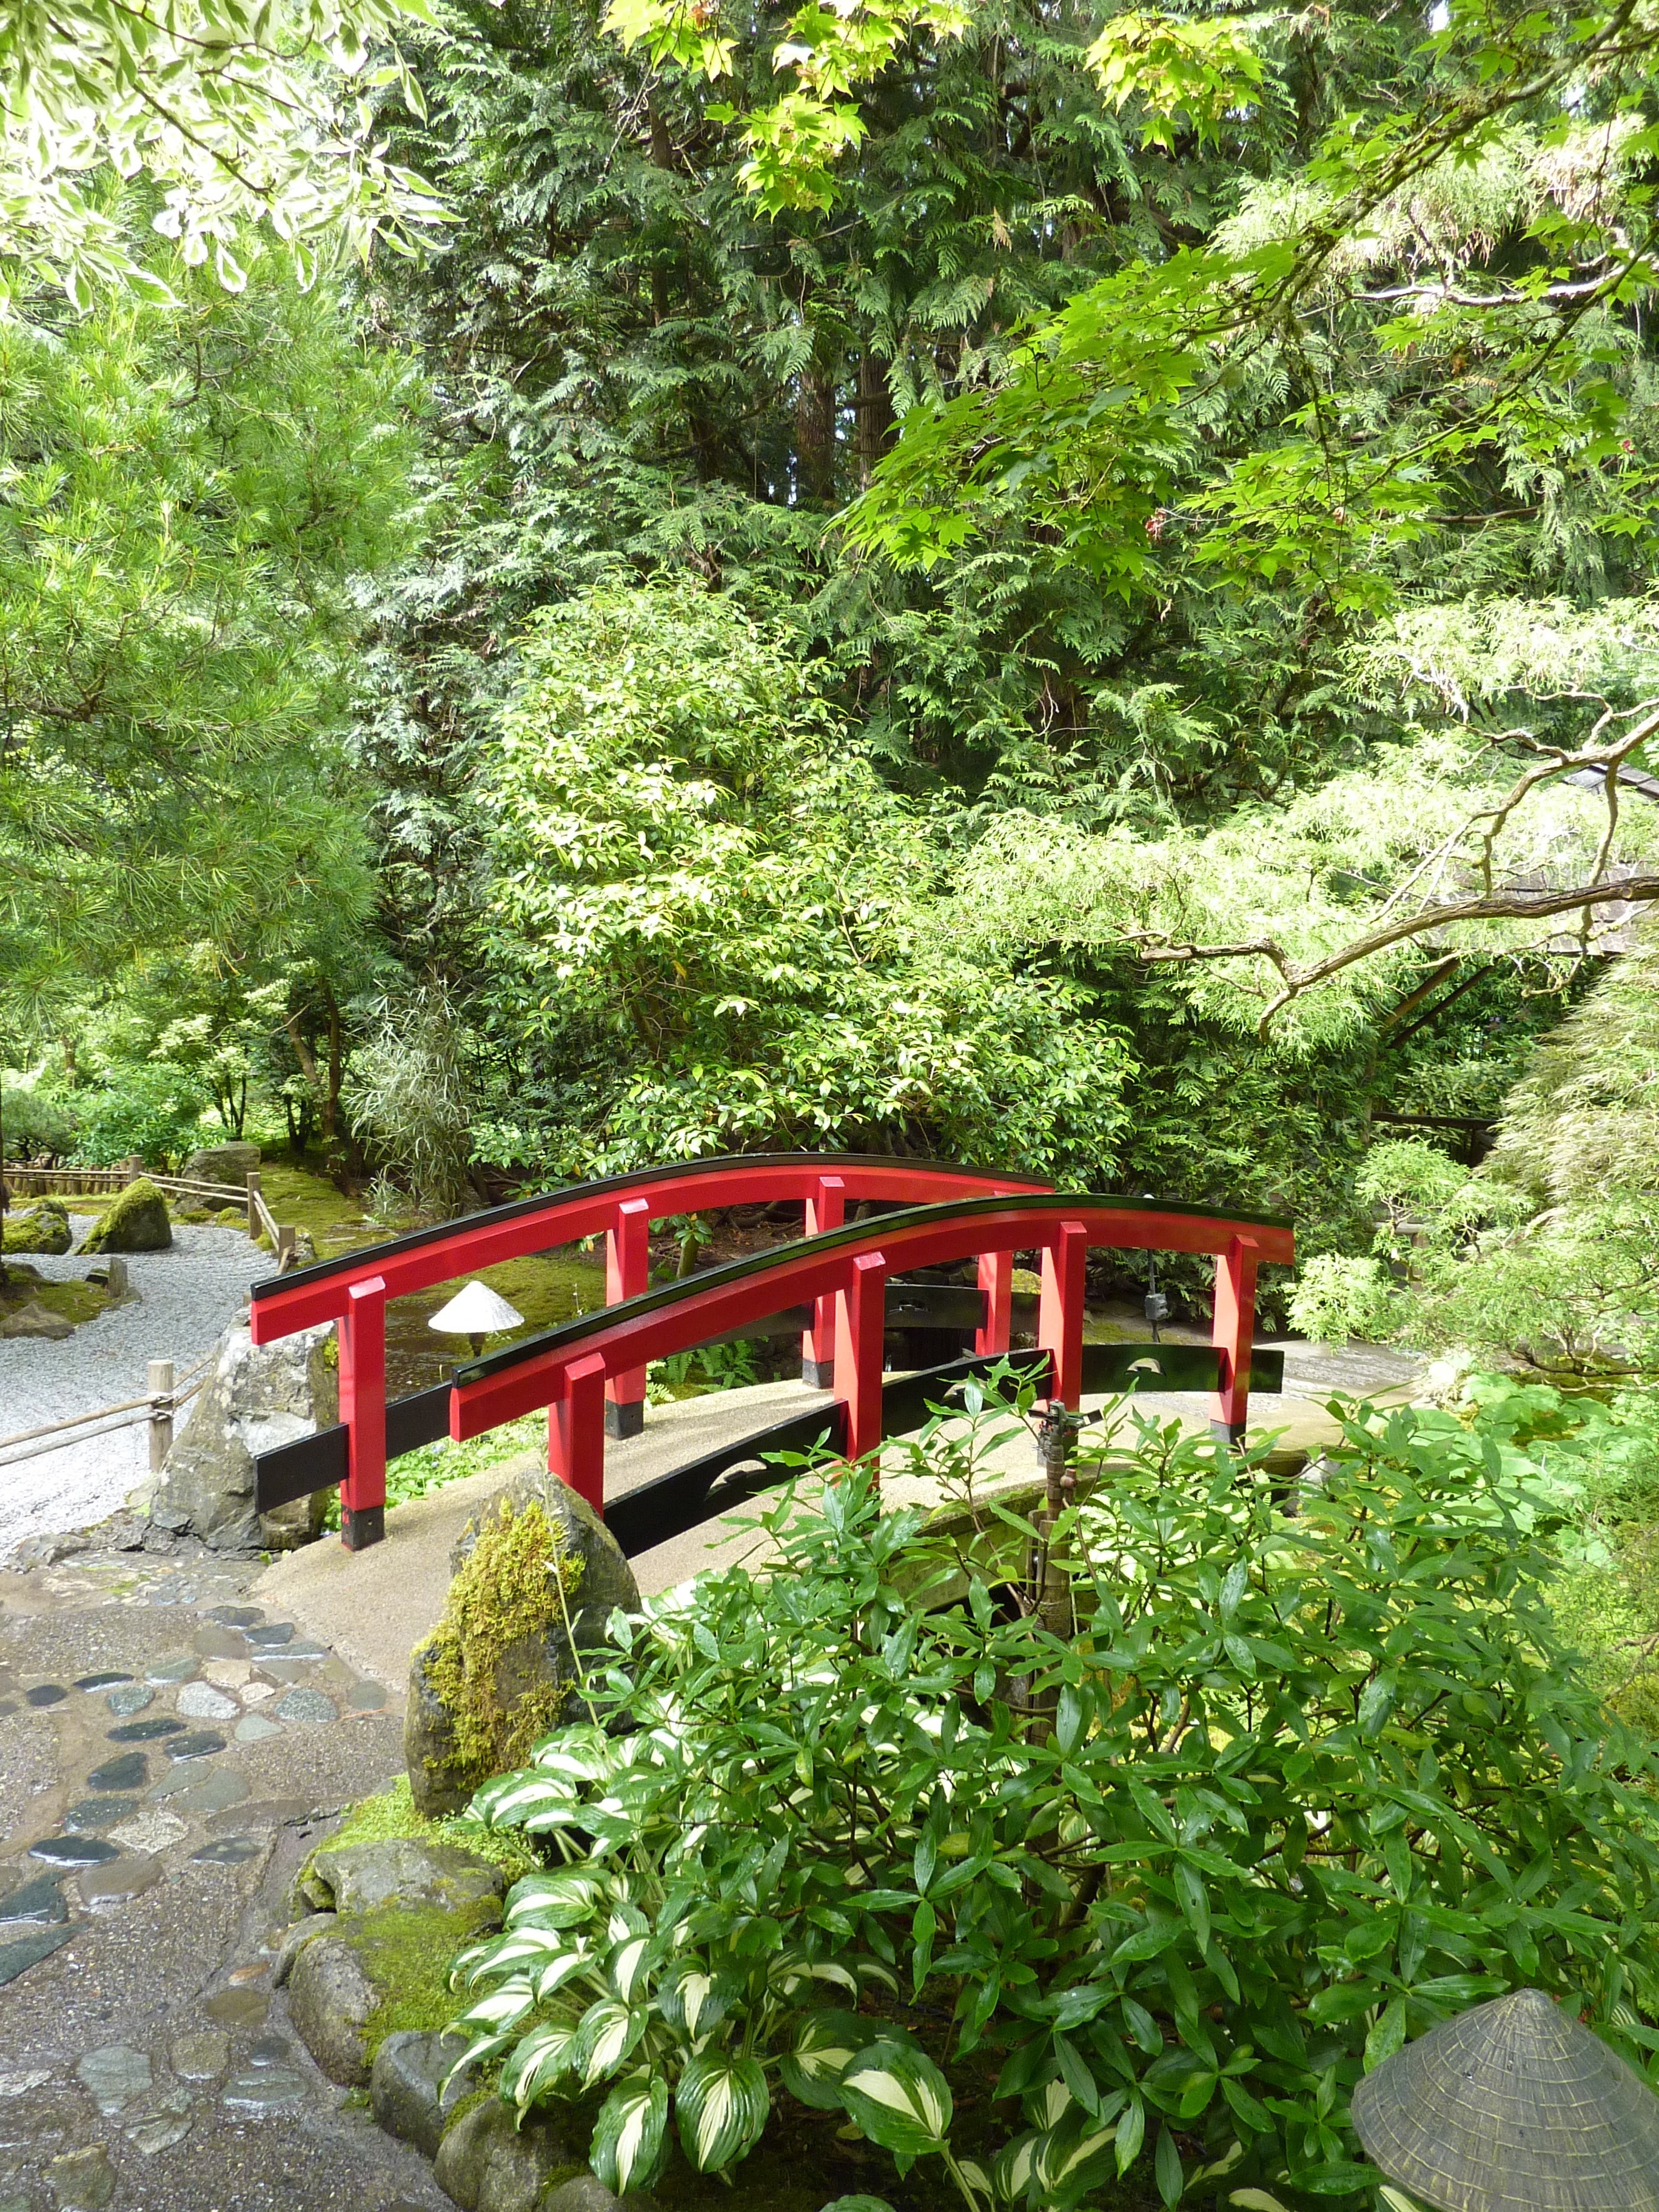 person taking photo of red bridge with green plants surroundings during daytime